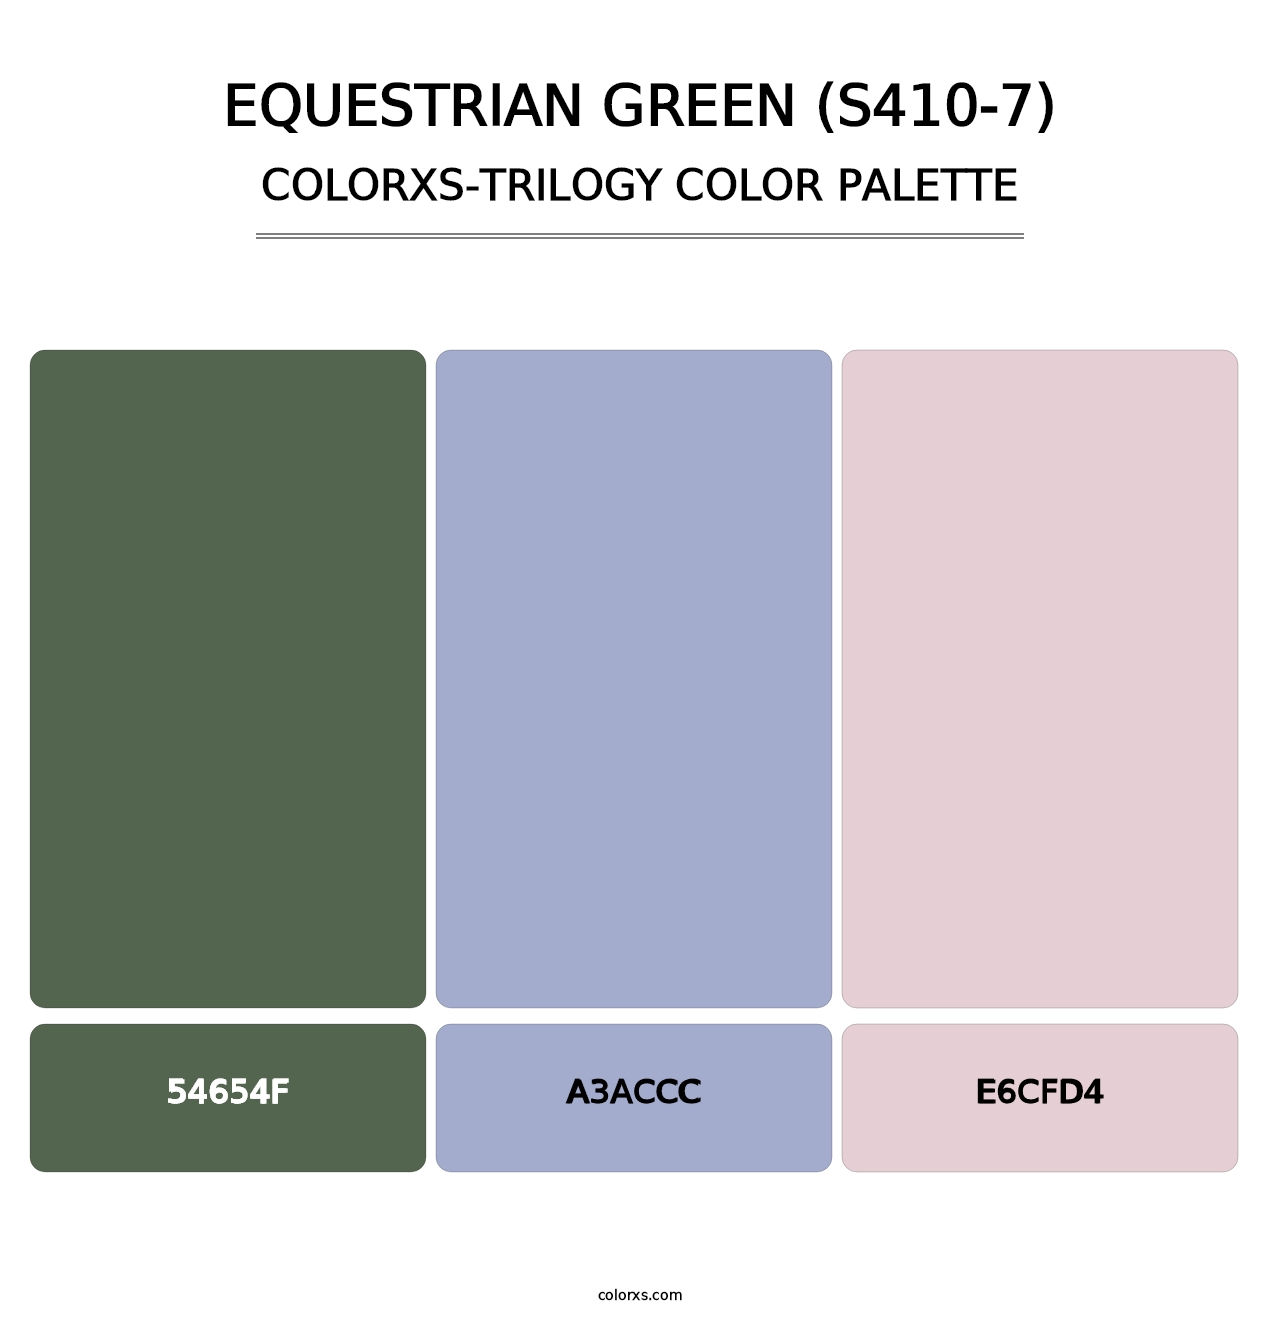 Equestrian Green (S410-7) - Colorxs Trilogy Palette